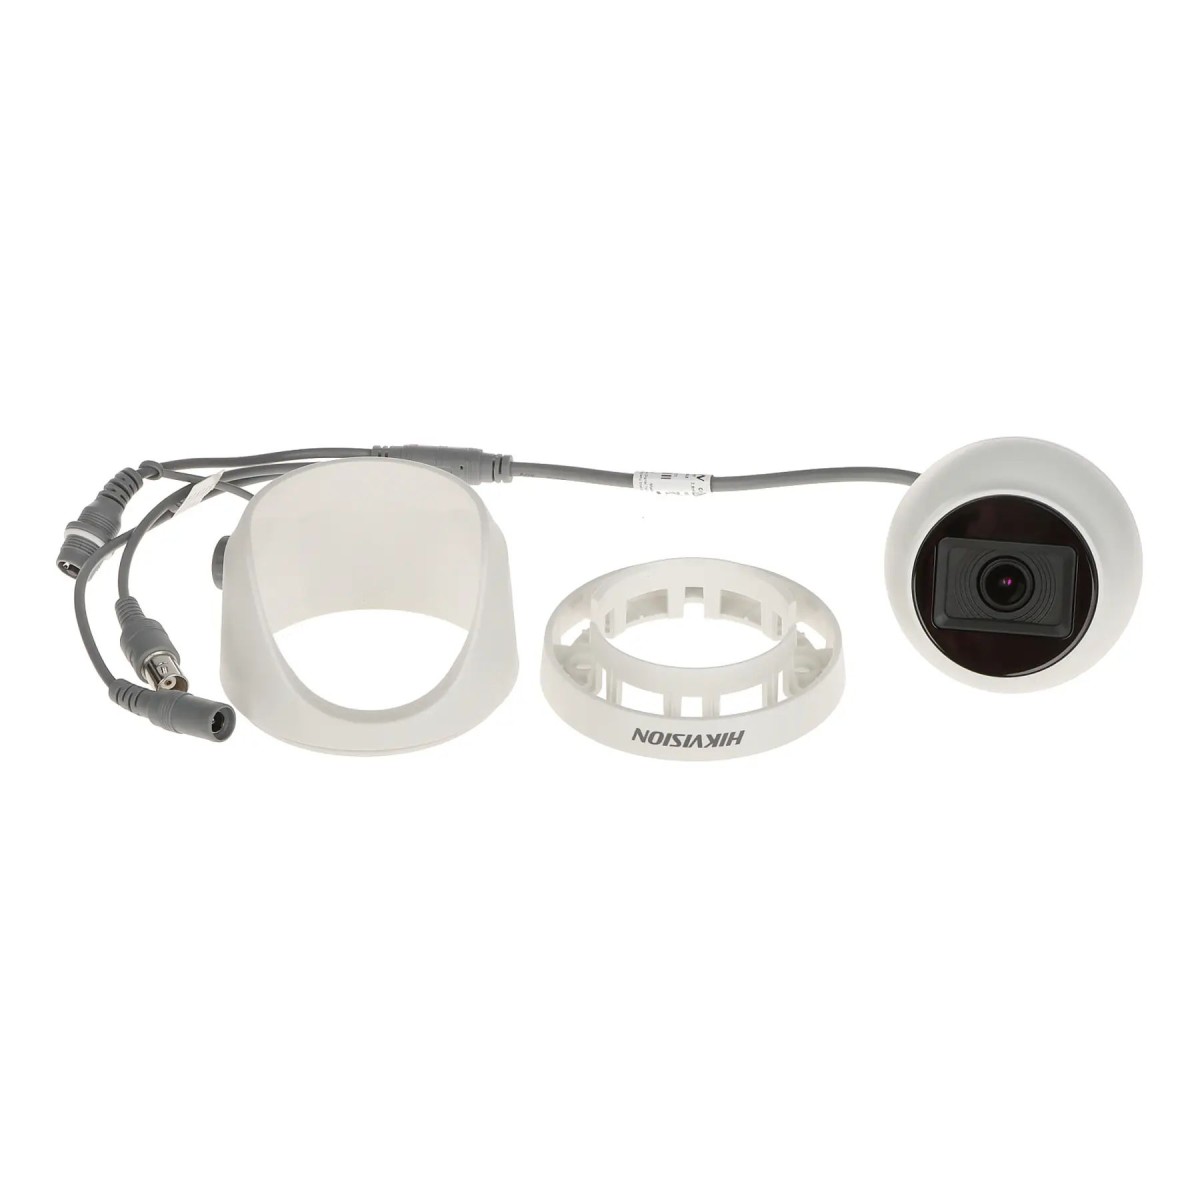 Камера Hikvision DS-2CE76H0T-ITPF (C) (2.4) 98_98.jpg - фото 3